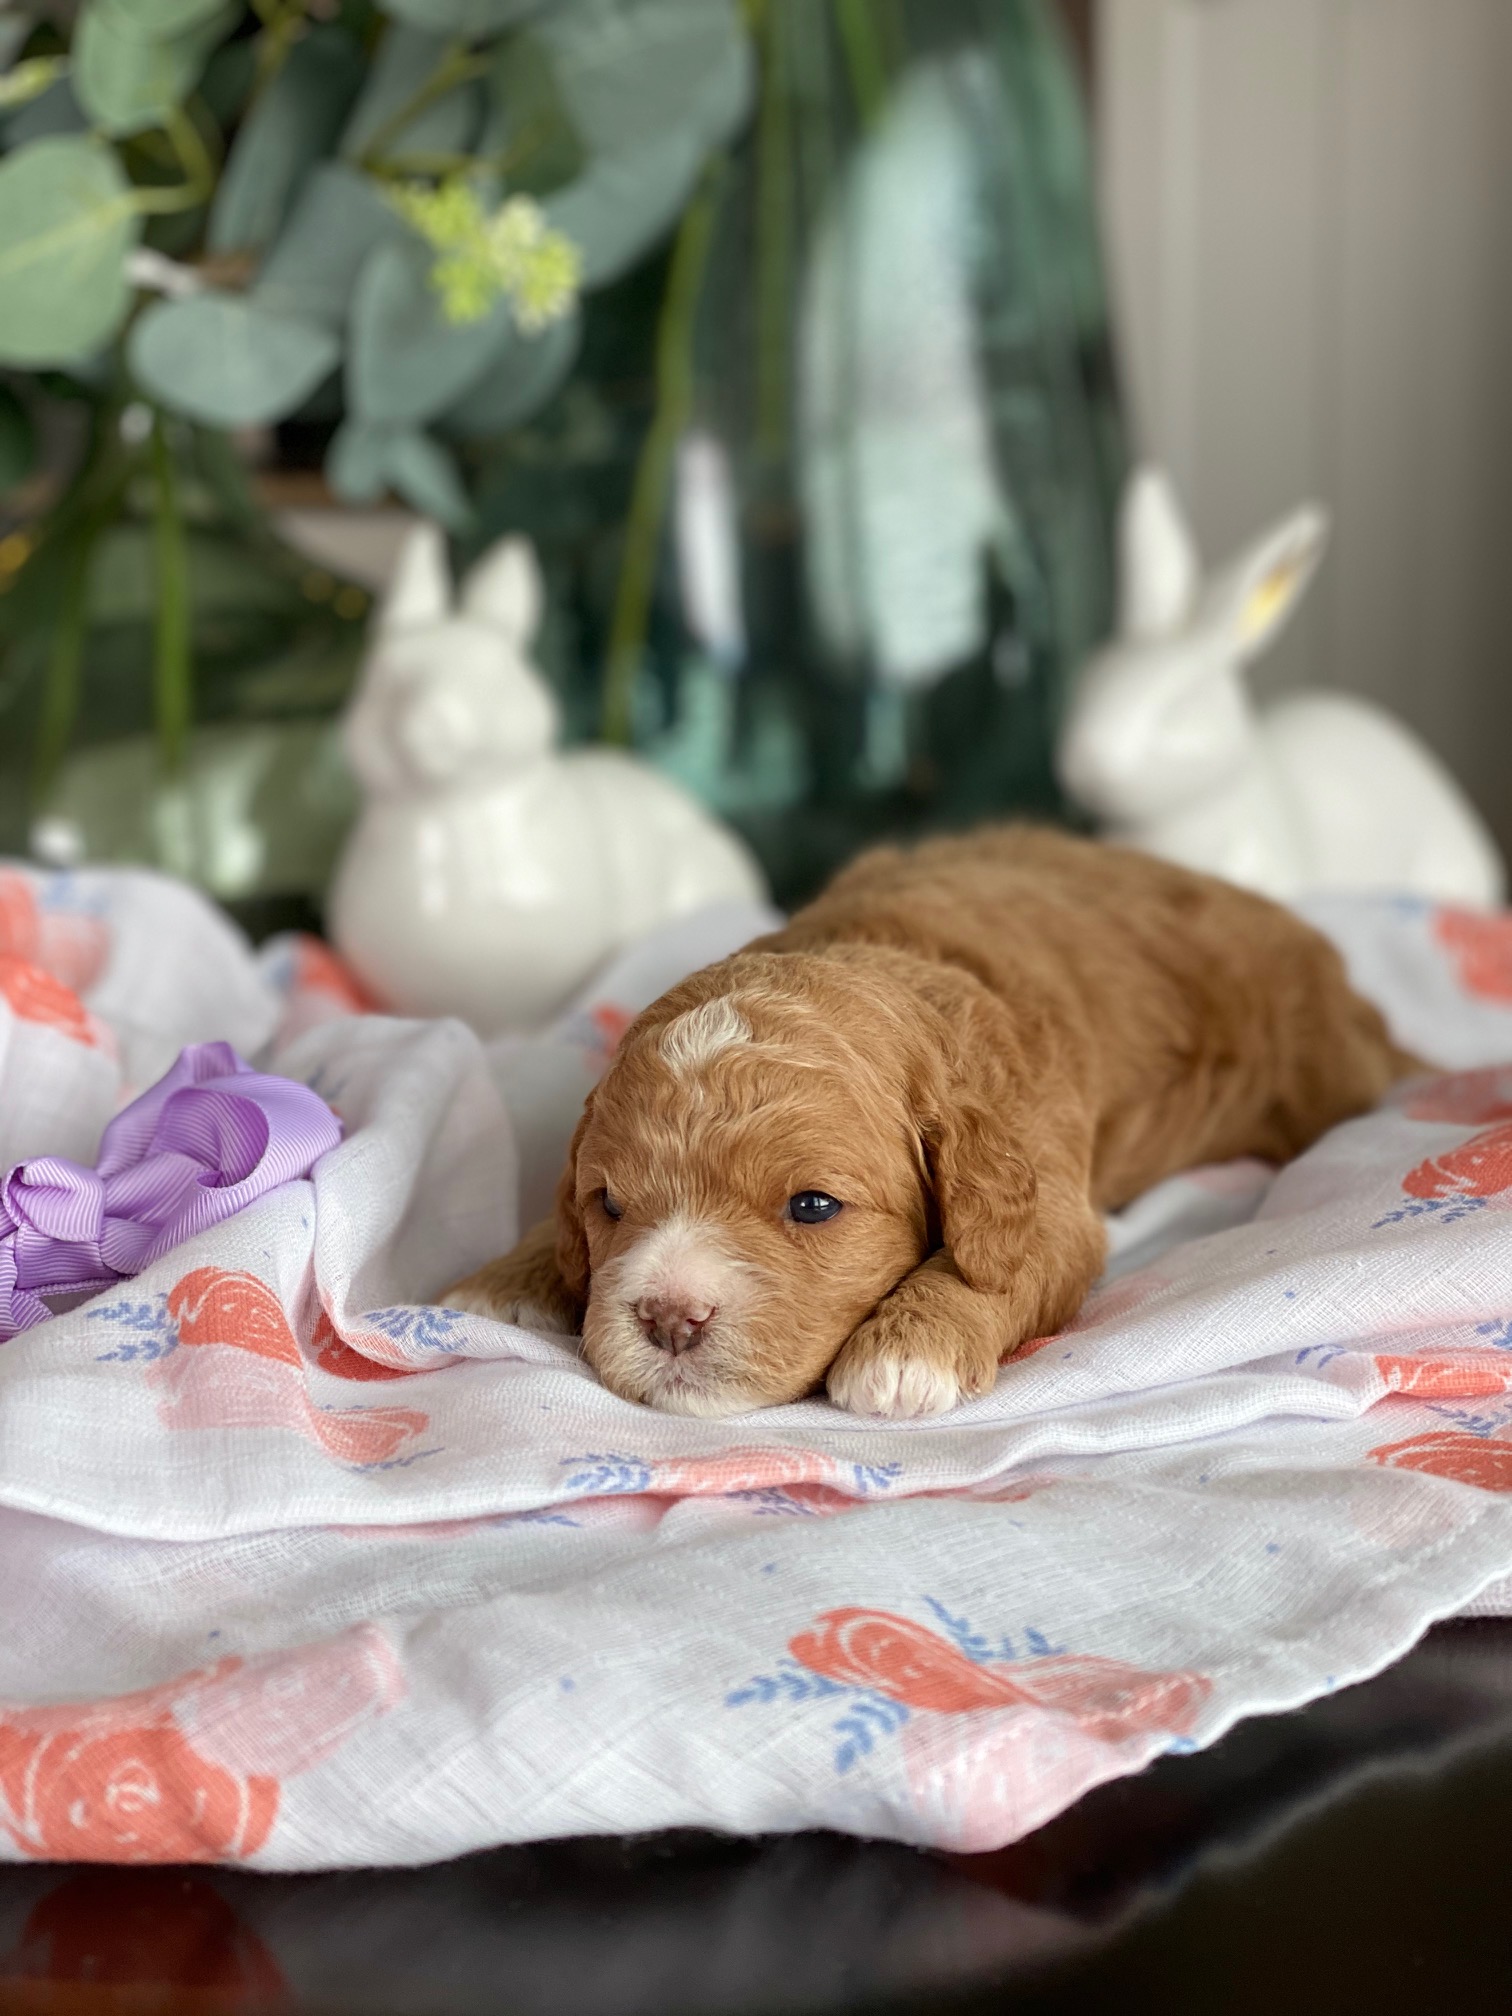 Resting on a cozy blanket, a small brown puppy lies serenely, its adorable face and tiny body creating a heartwarming scene.